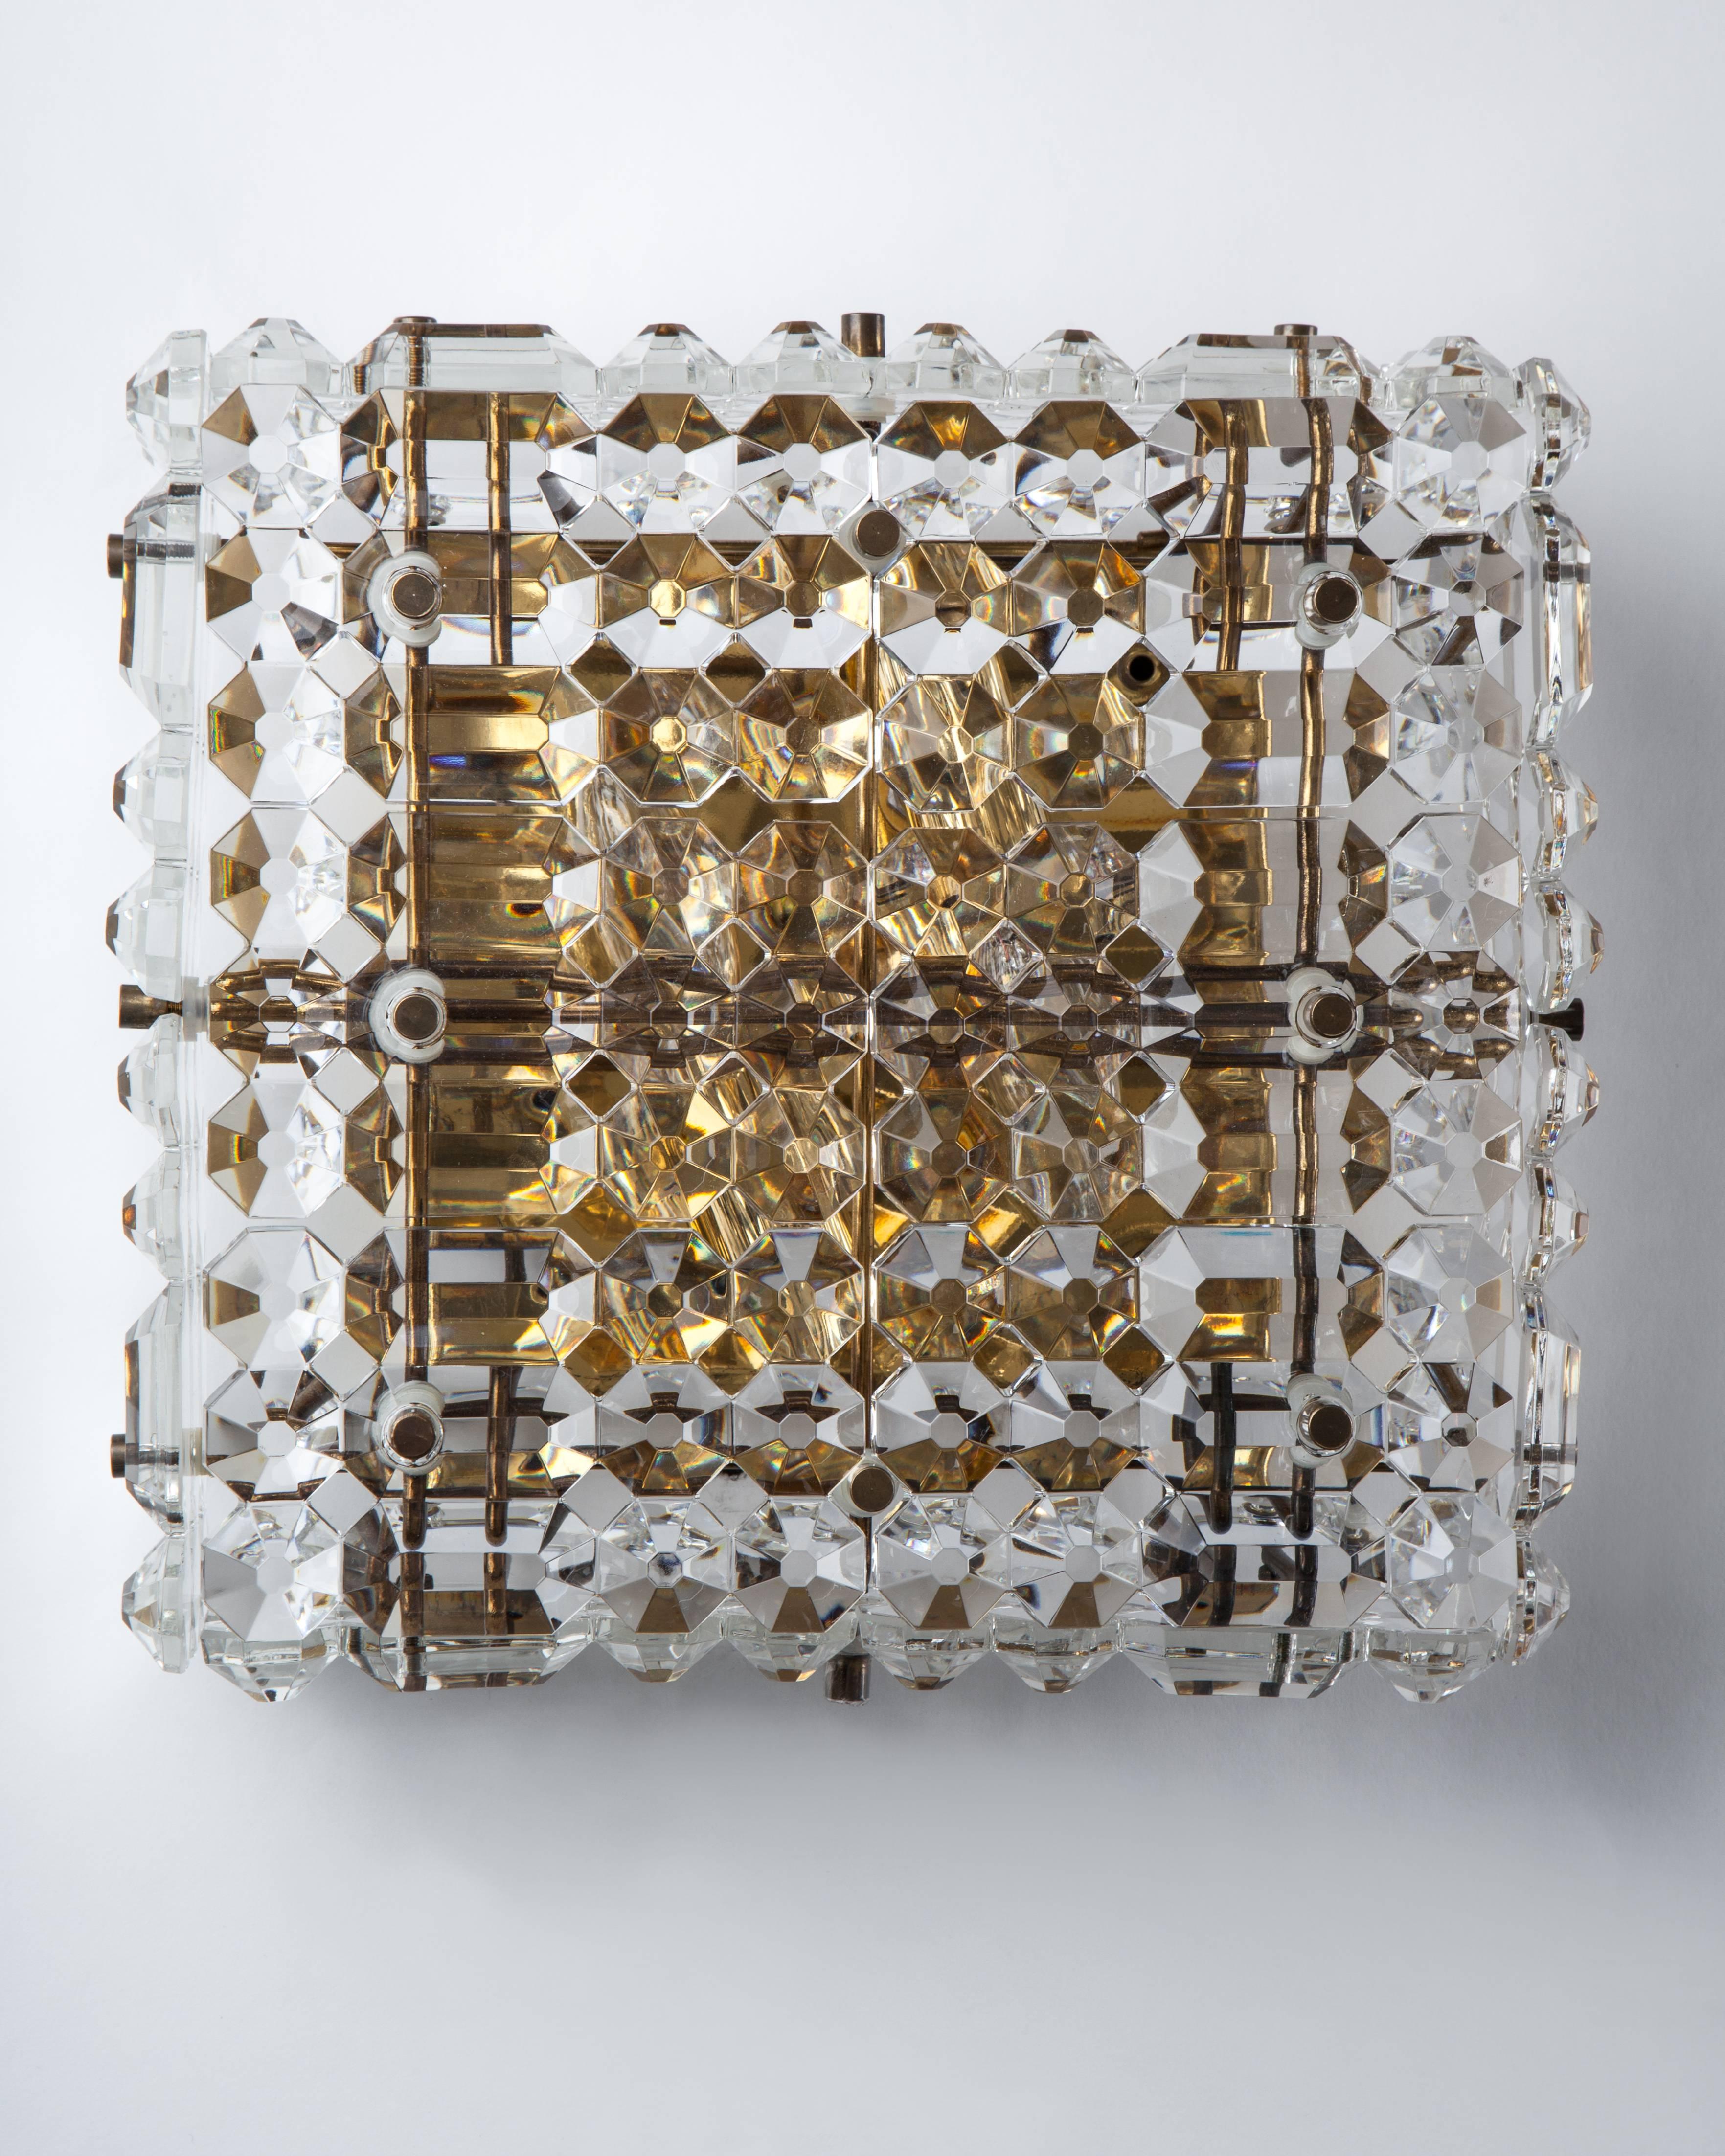 AIS2950.
A pair of quilt-patterned square sconces with tiles of thick clear glass held in a dore brass frame. The body cants slightly forward. This mid century modern fixture is attributed to the Austrian maker Kinkeldey. Due to the antique nature